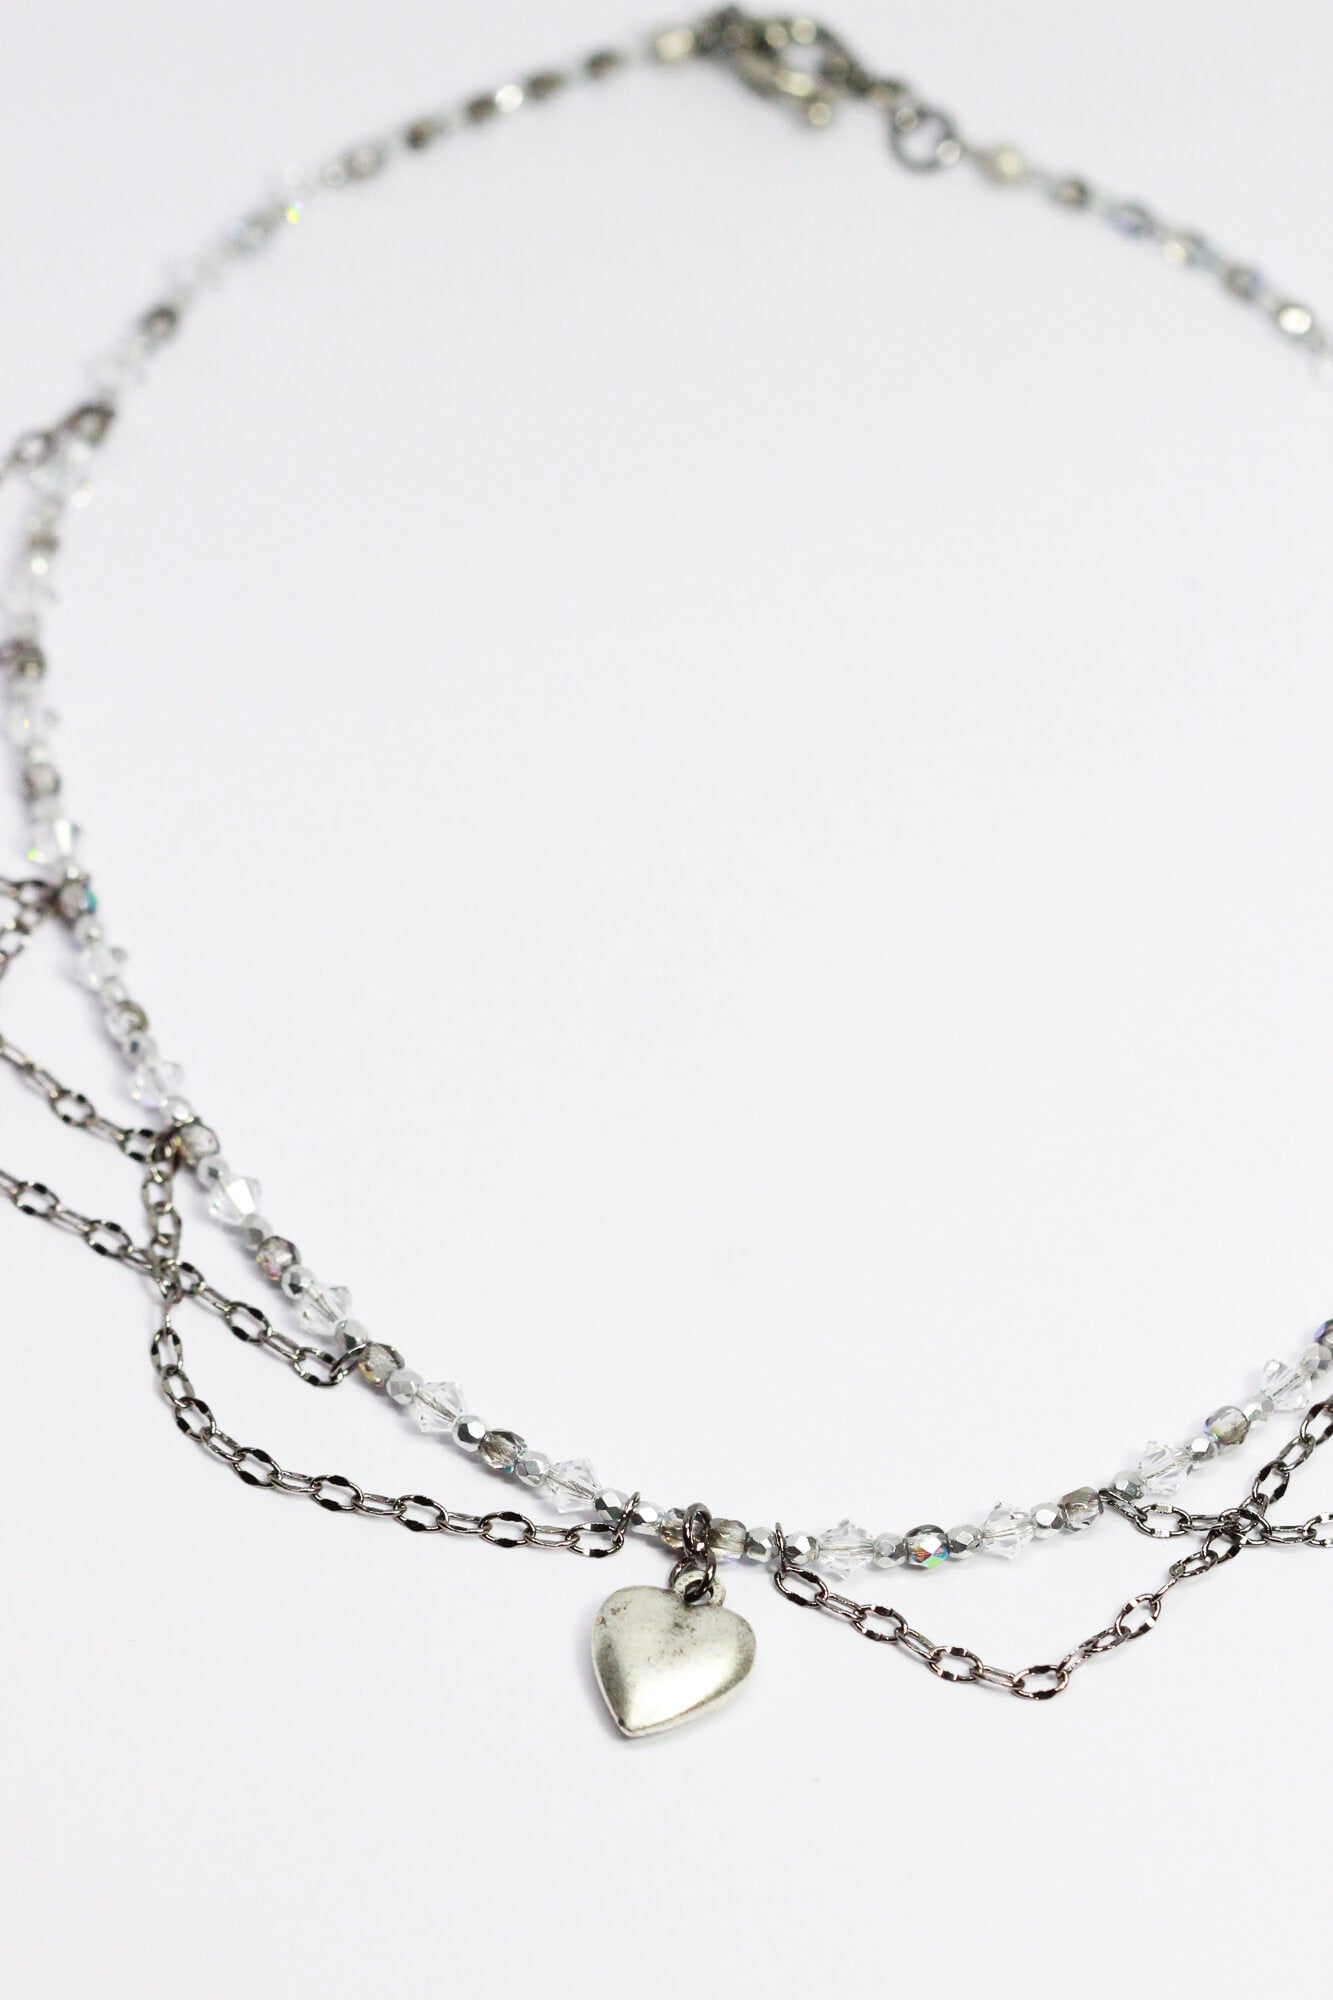 Silver heart necklace with clear Swarovski Crystal Accents